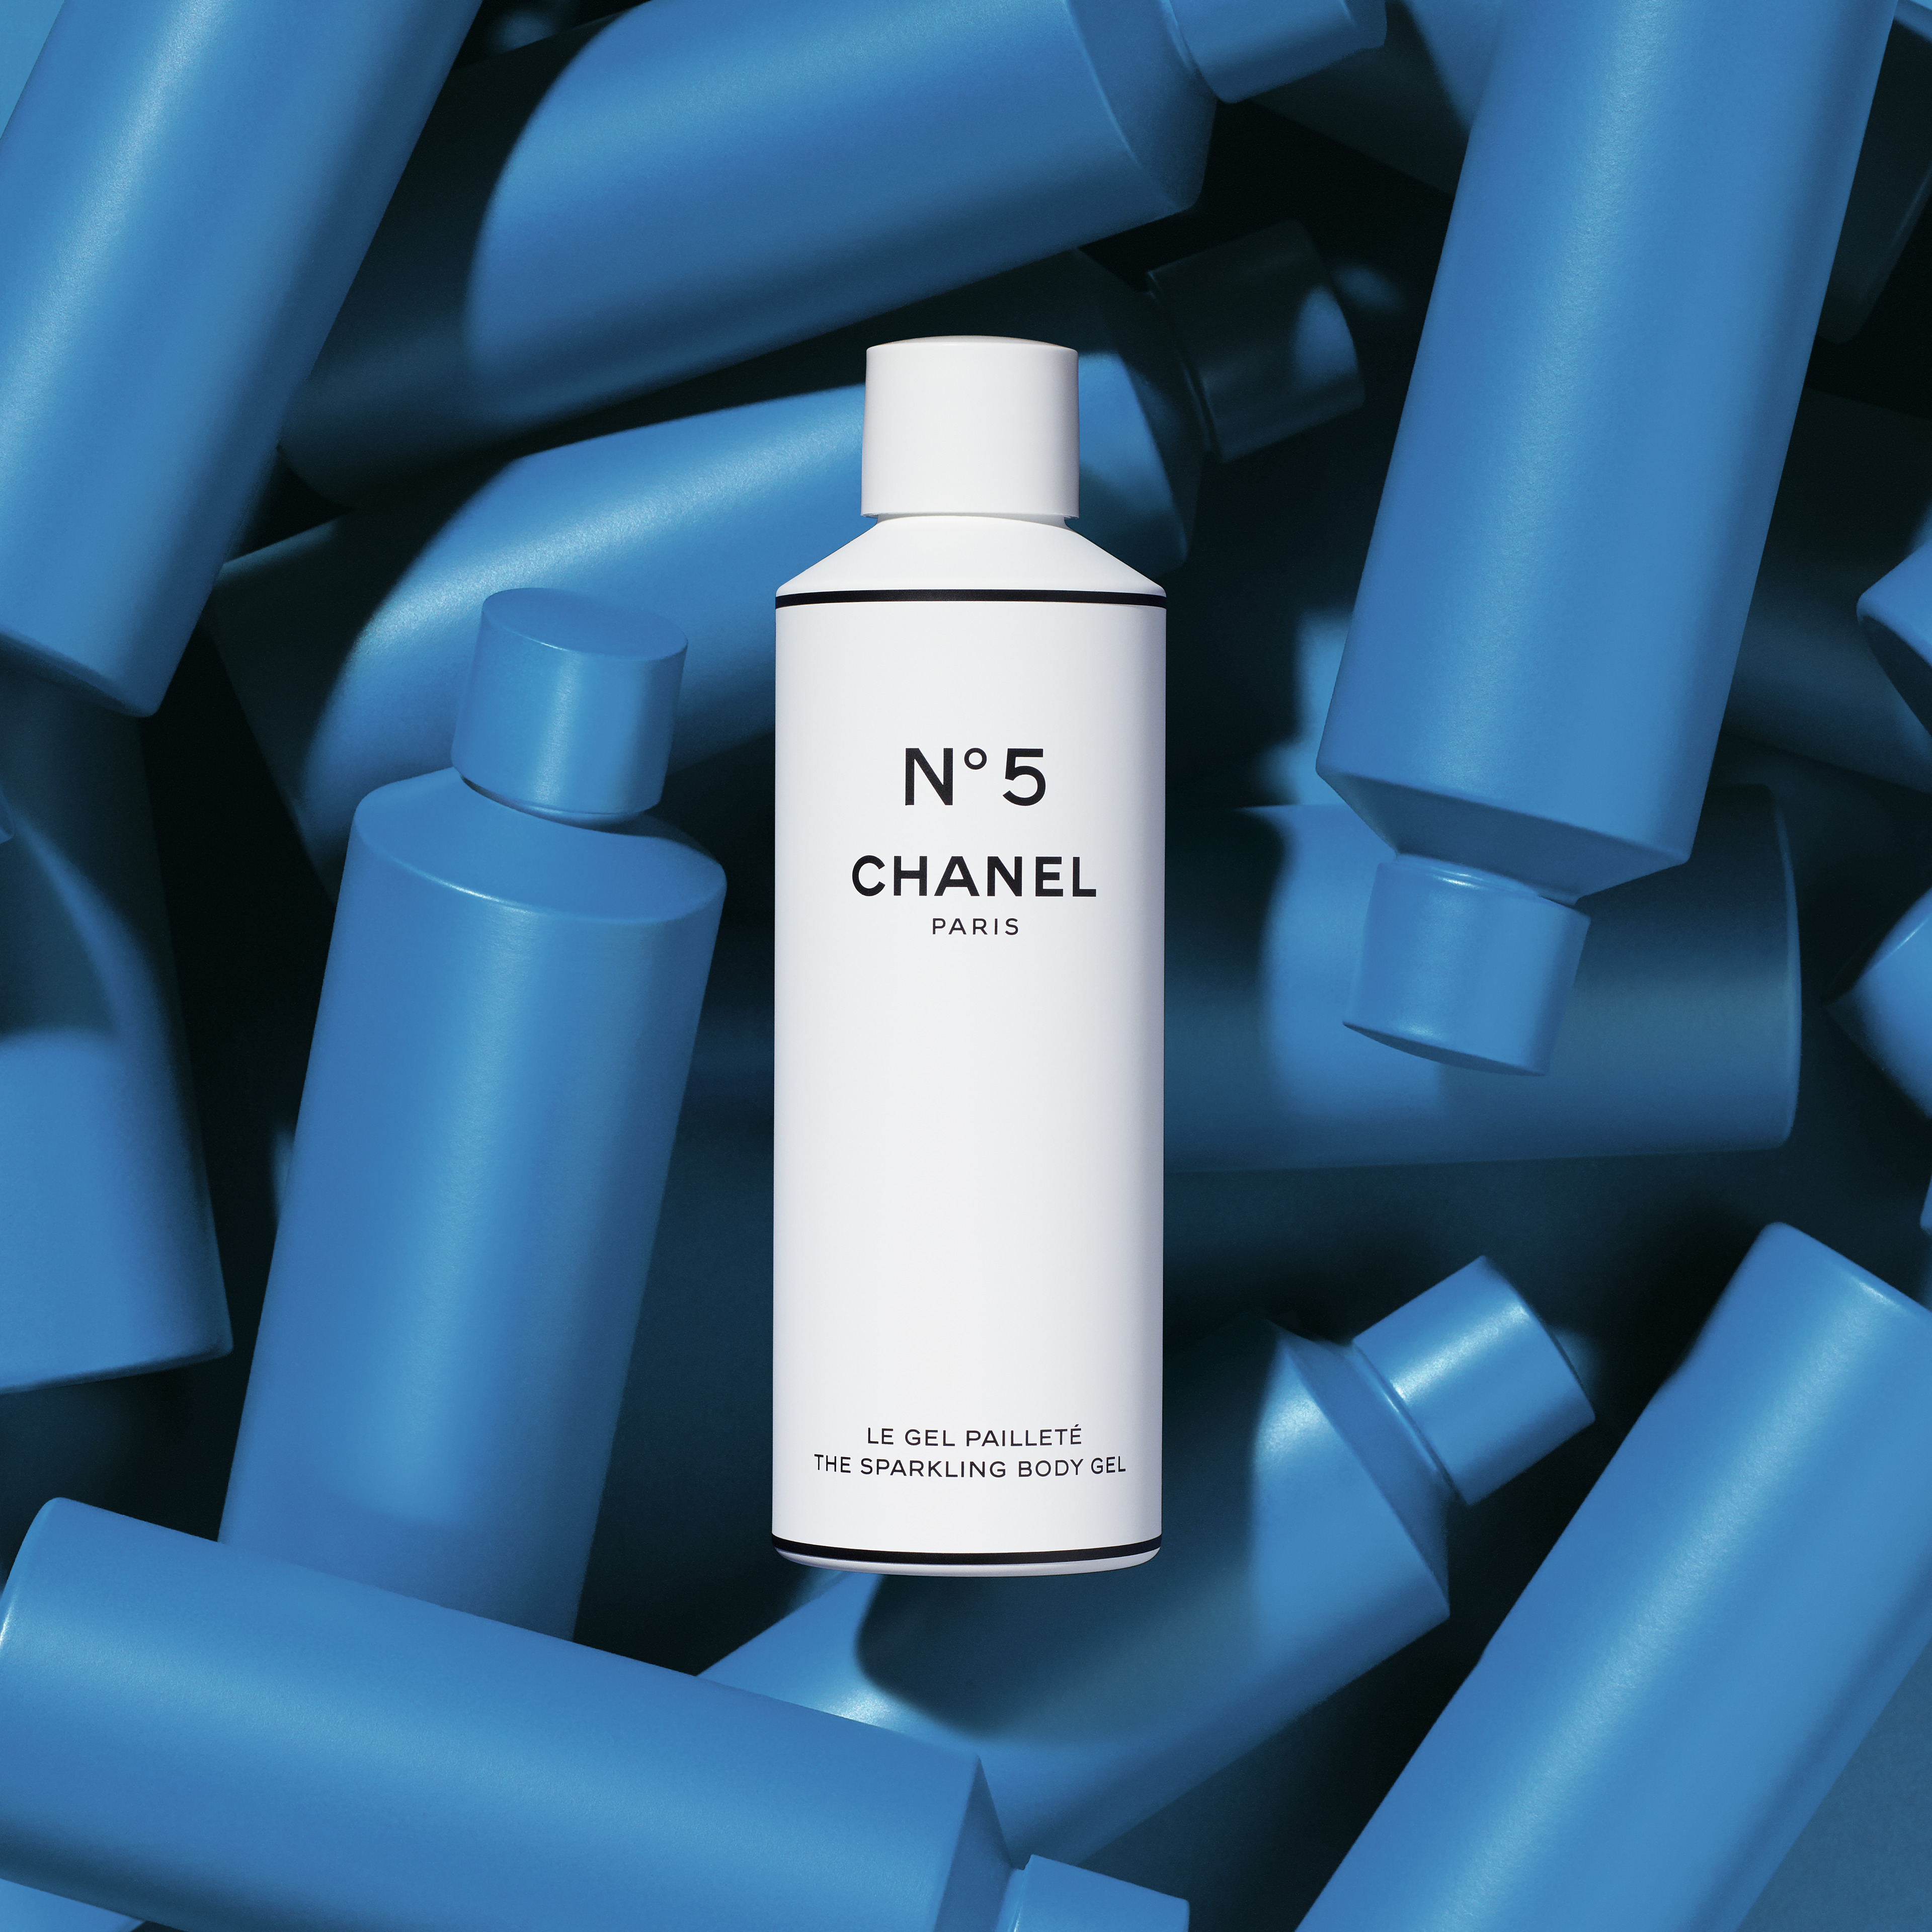 CHANEL transforms its iconic N°5 into collector's items - Buro 24/7